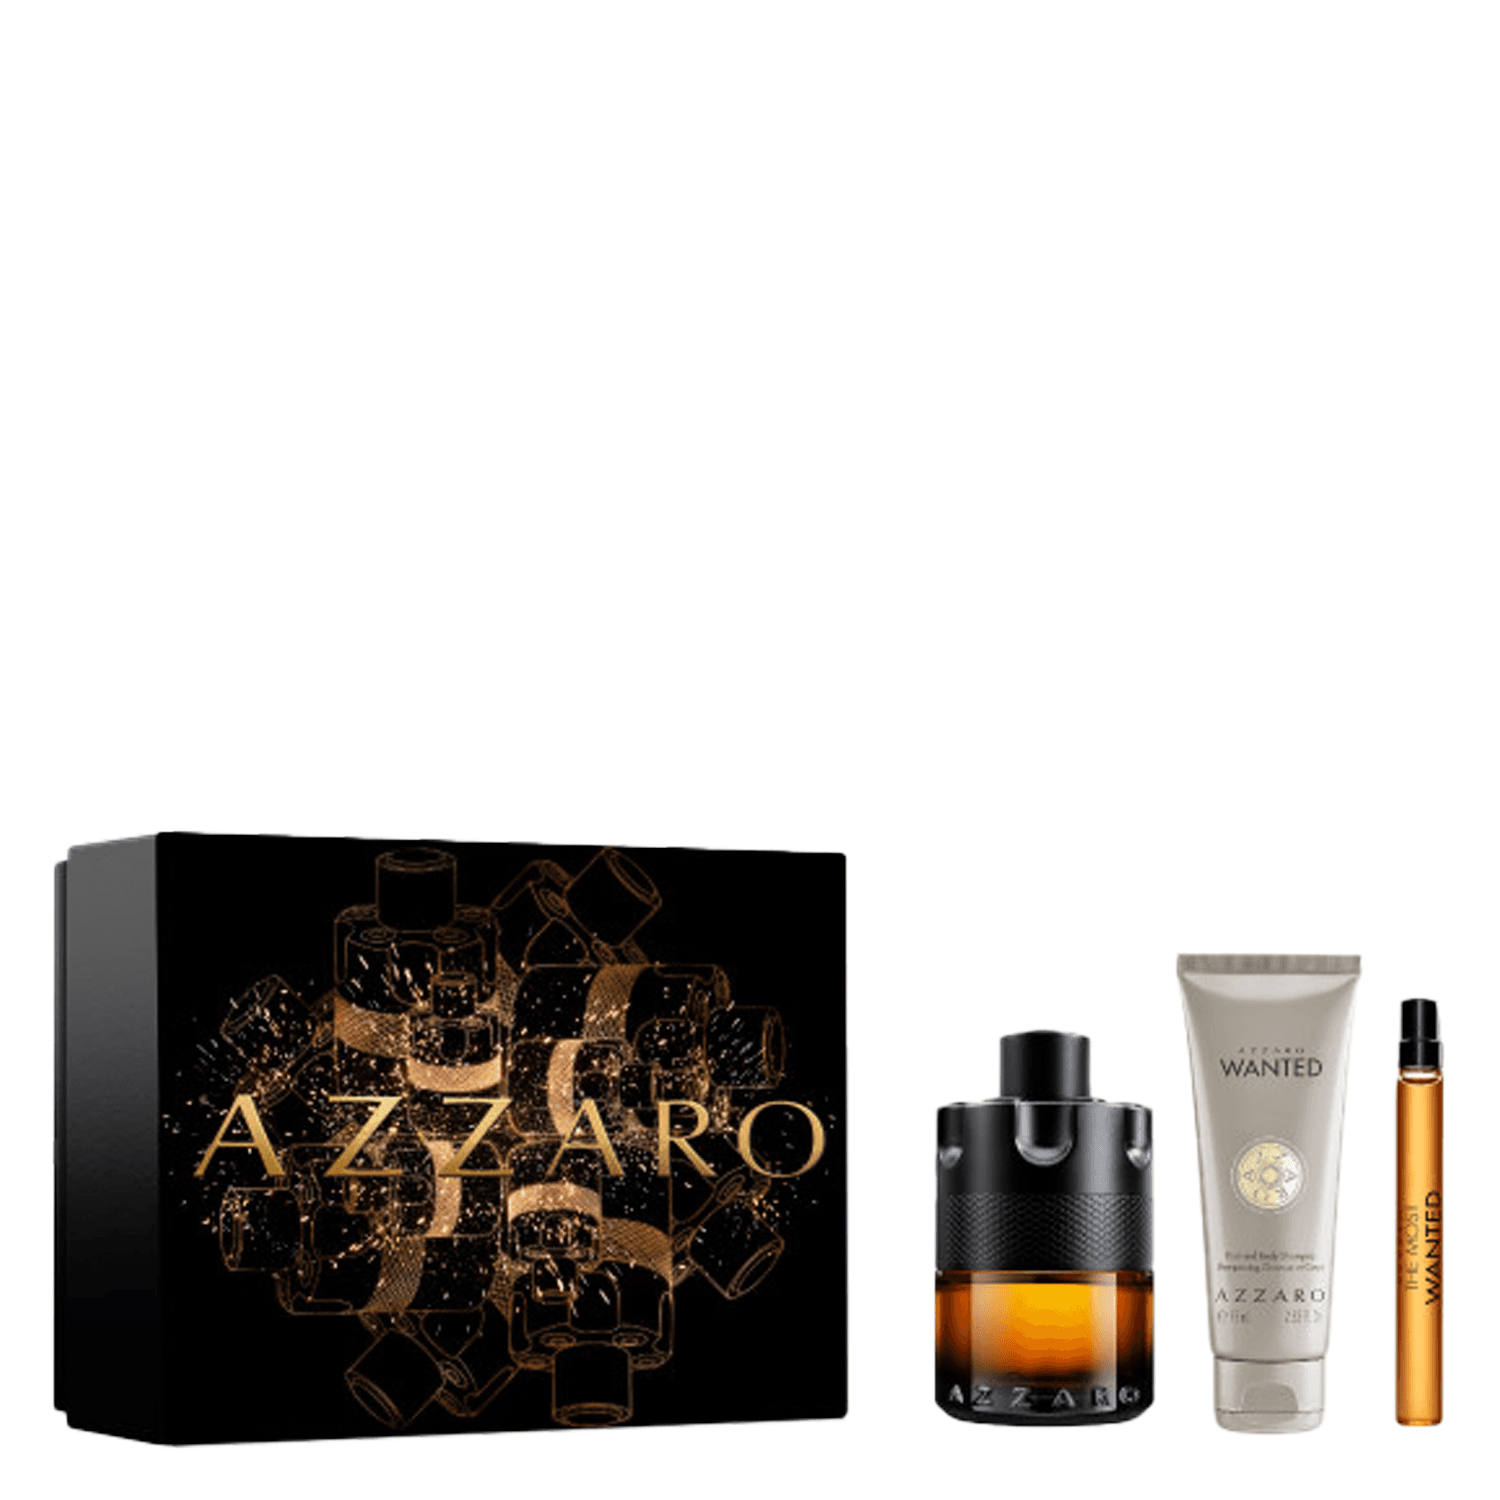 Azzaro Wanted - The Most Wanted Le Parfum Set